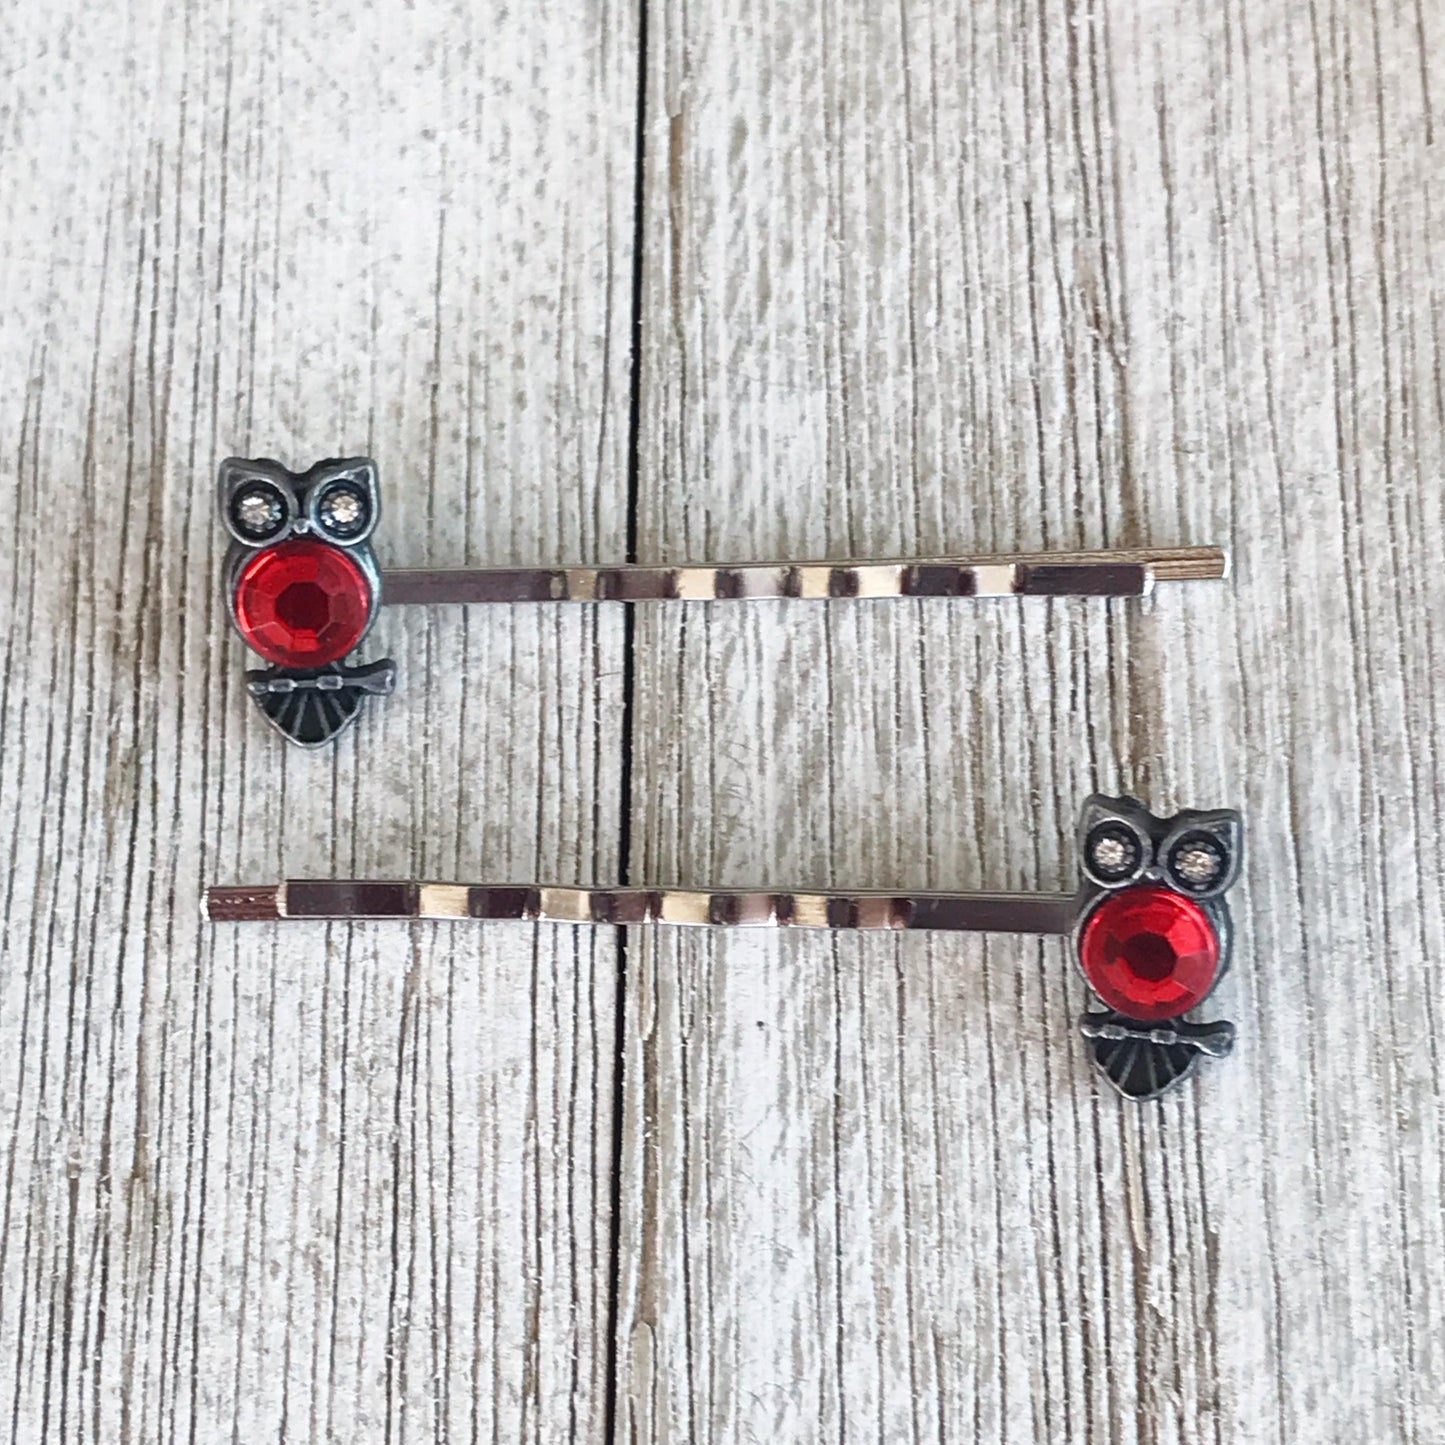 Red Rhinestone Owl Bobby Pins: Sparkling Owl Accents for Unique Hairstyles